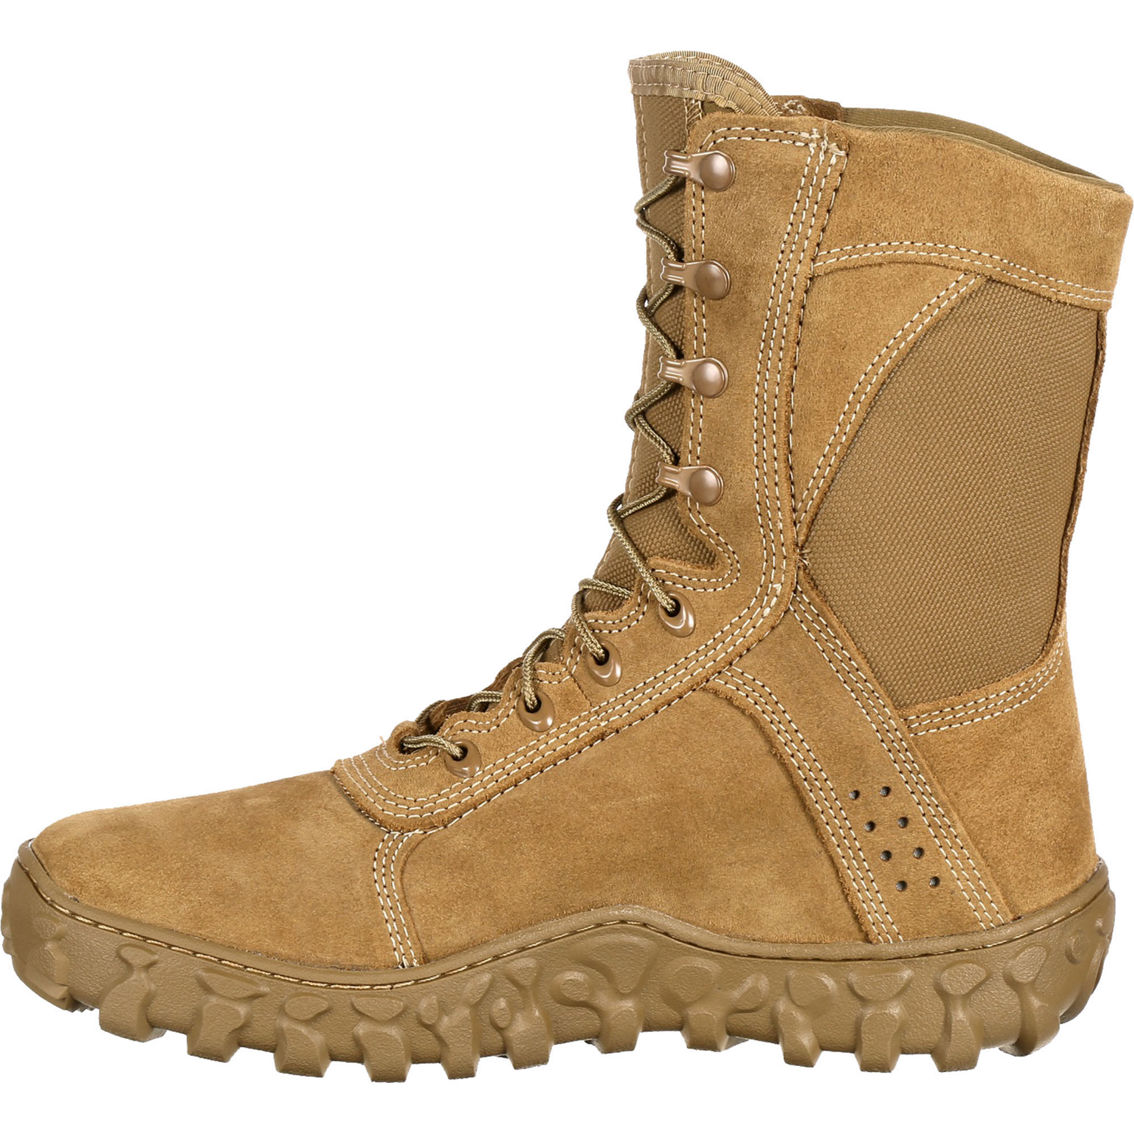 Rocky Coyote Rkc050 Tactical Military Boots | Military Approved ...